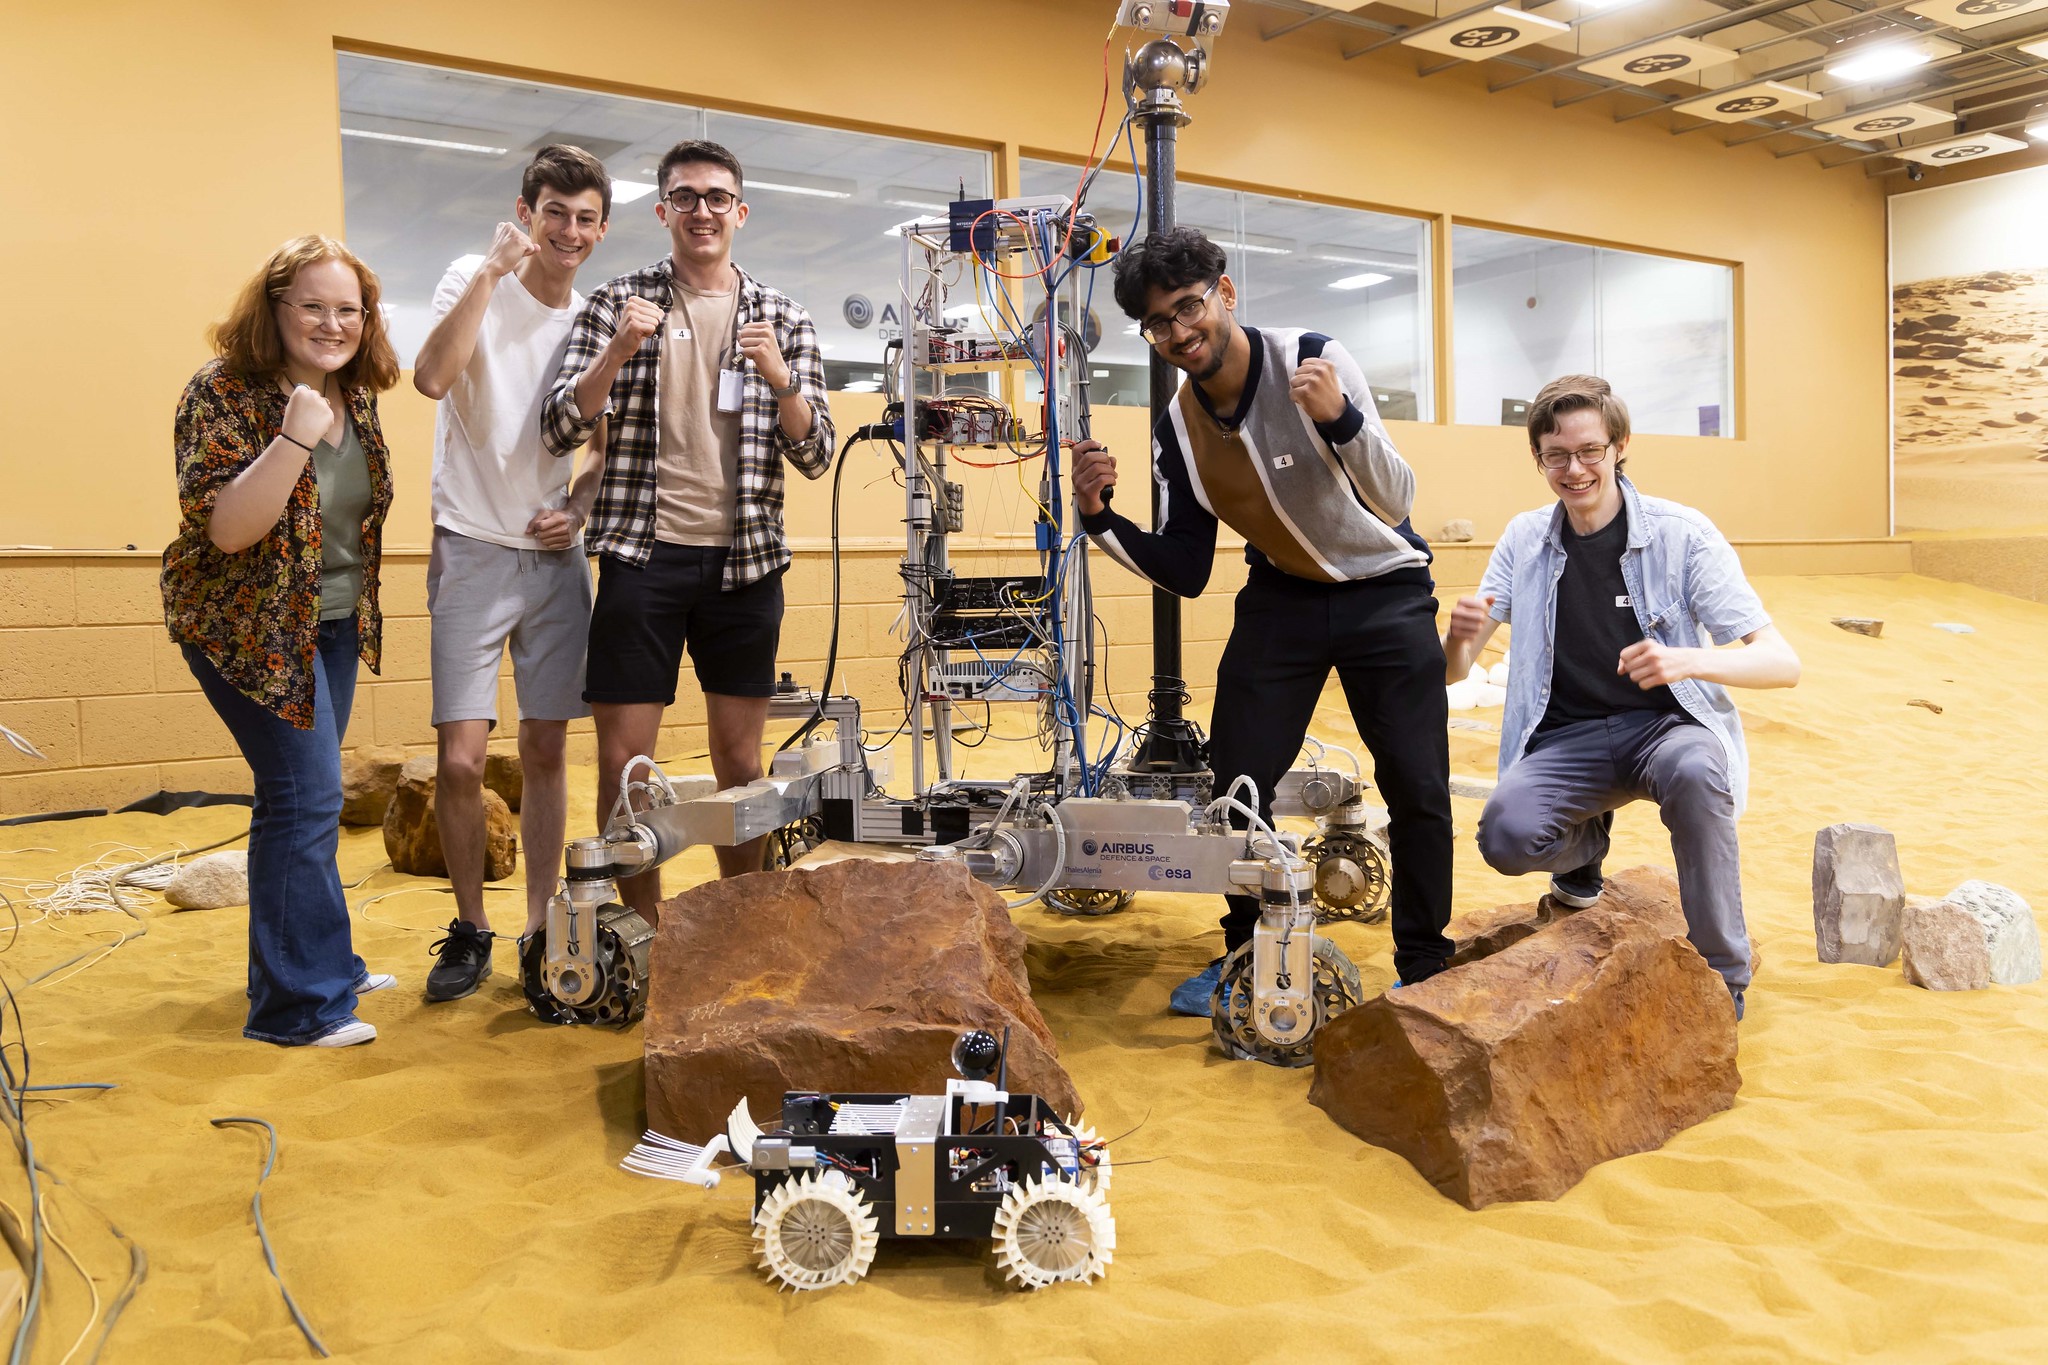 5 people in Airbus's Mars simulation environment. They are standing and crouched around a large robot, with some large rocks and the compeition rover on the floor in front.